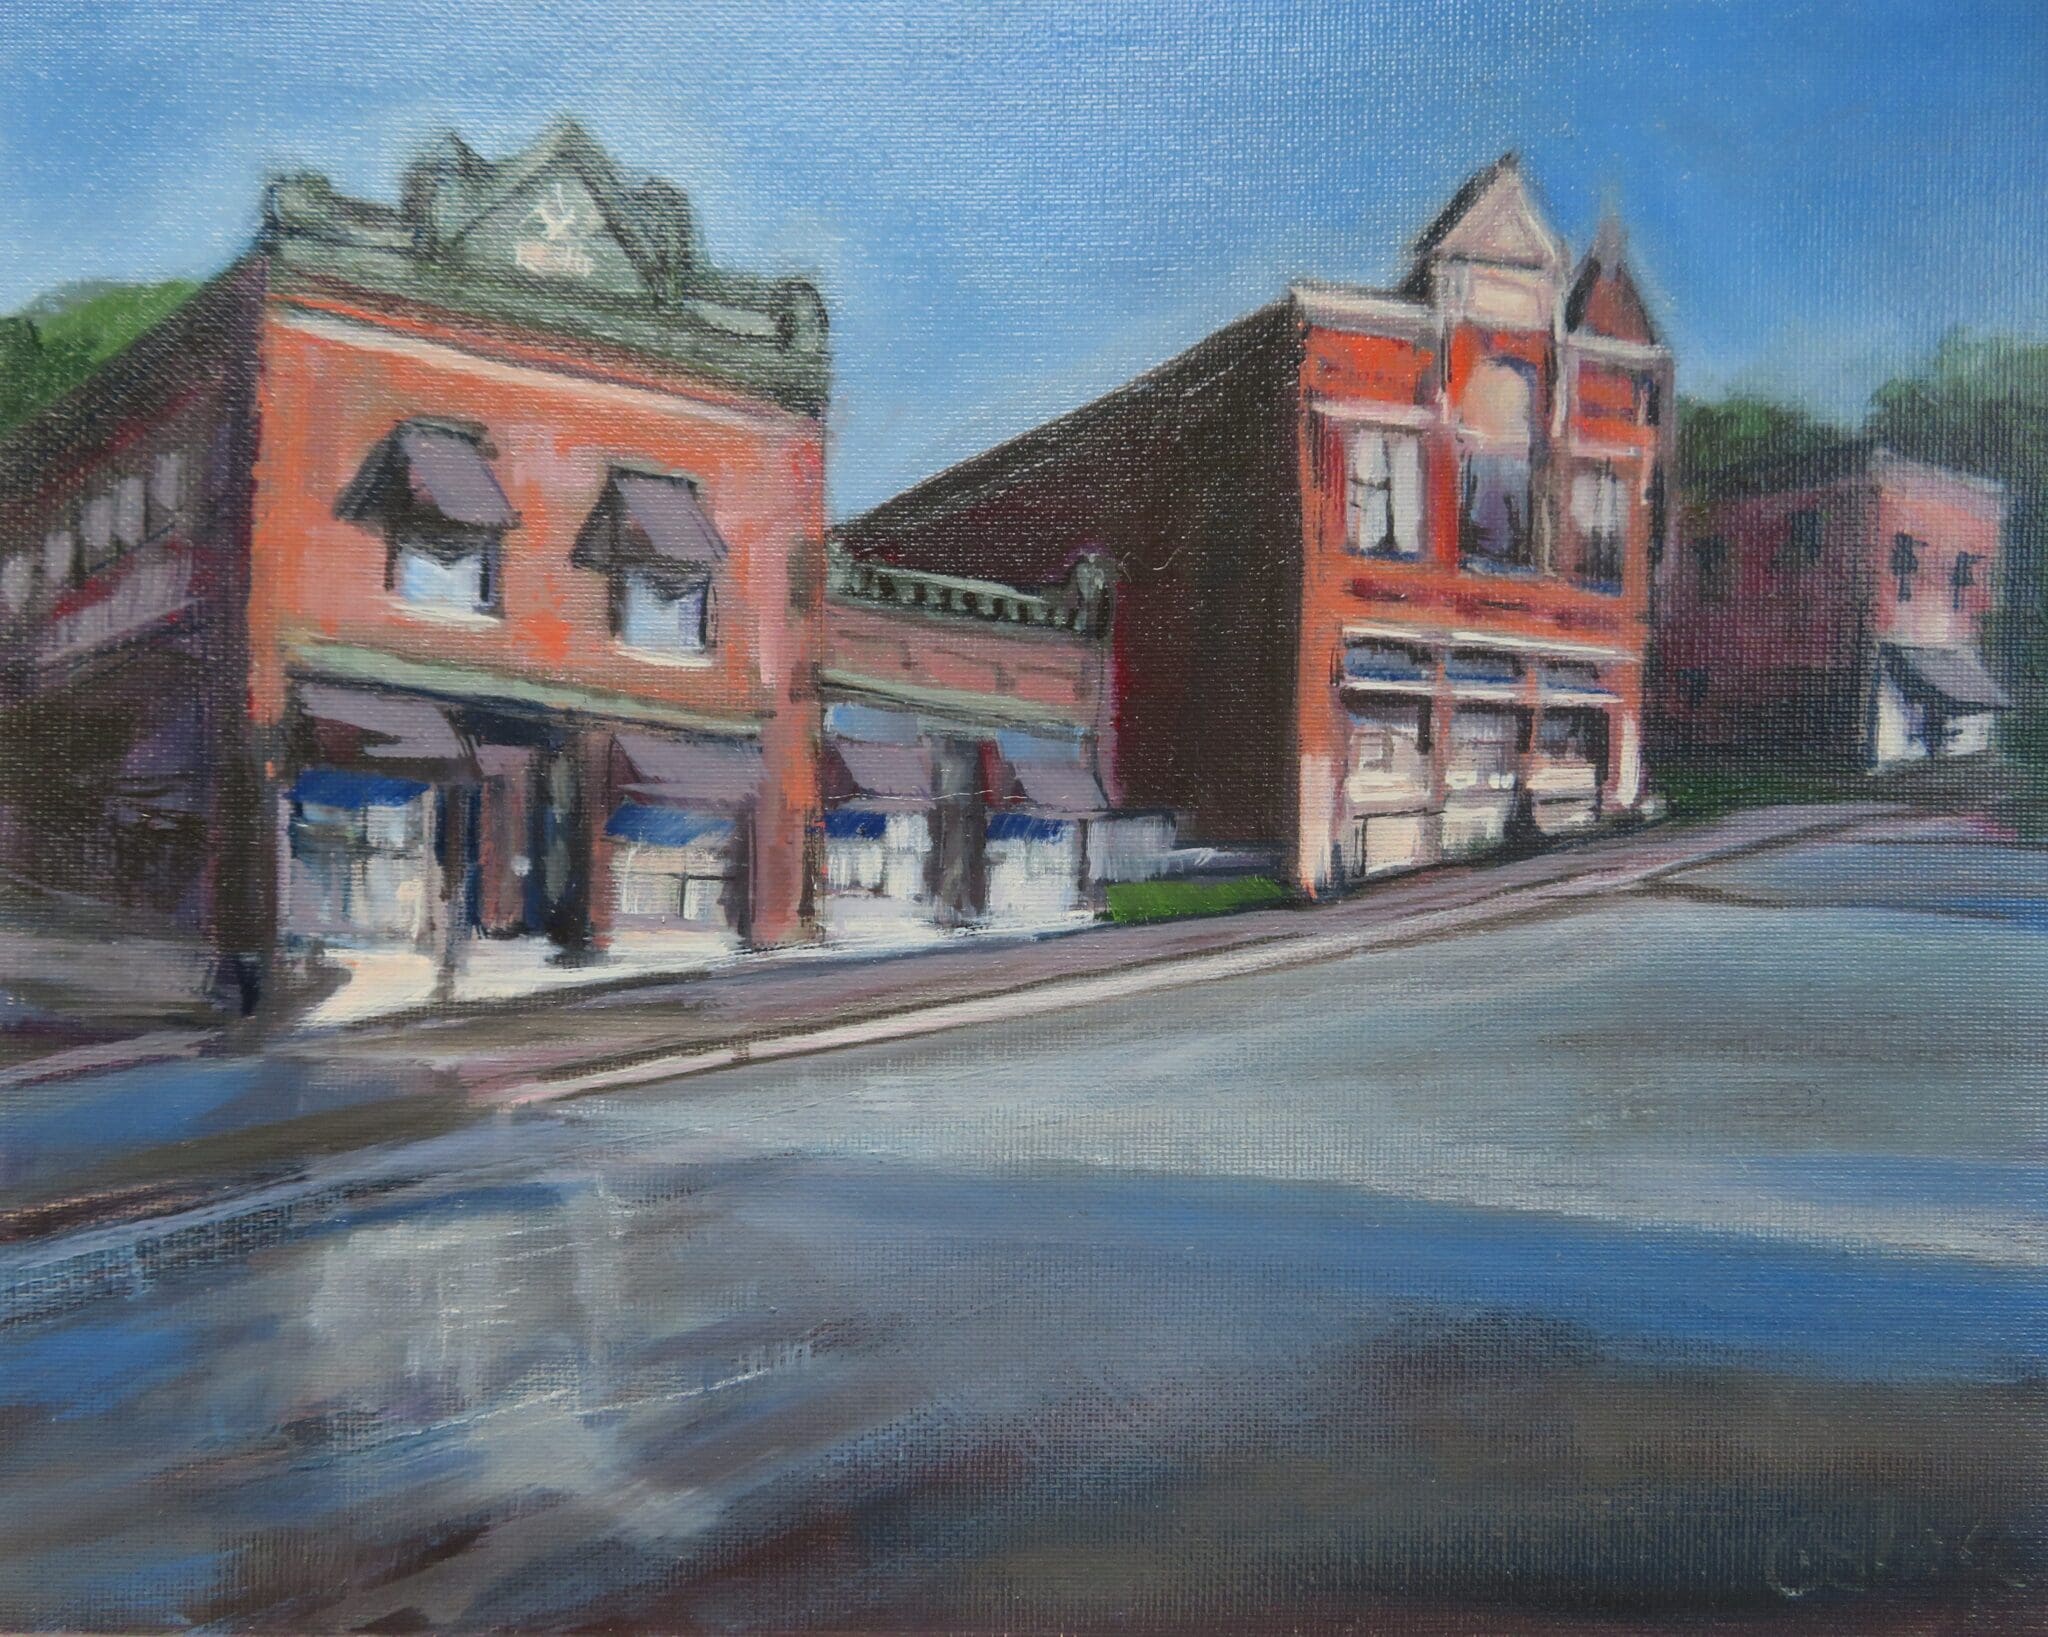 A painting of a street scene with buildings in the background.